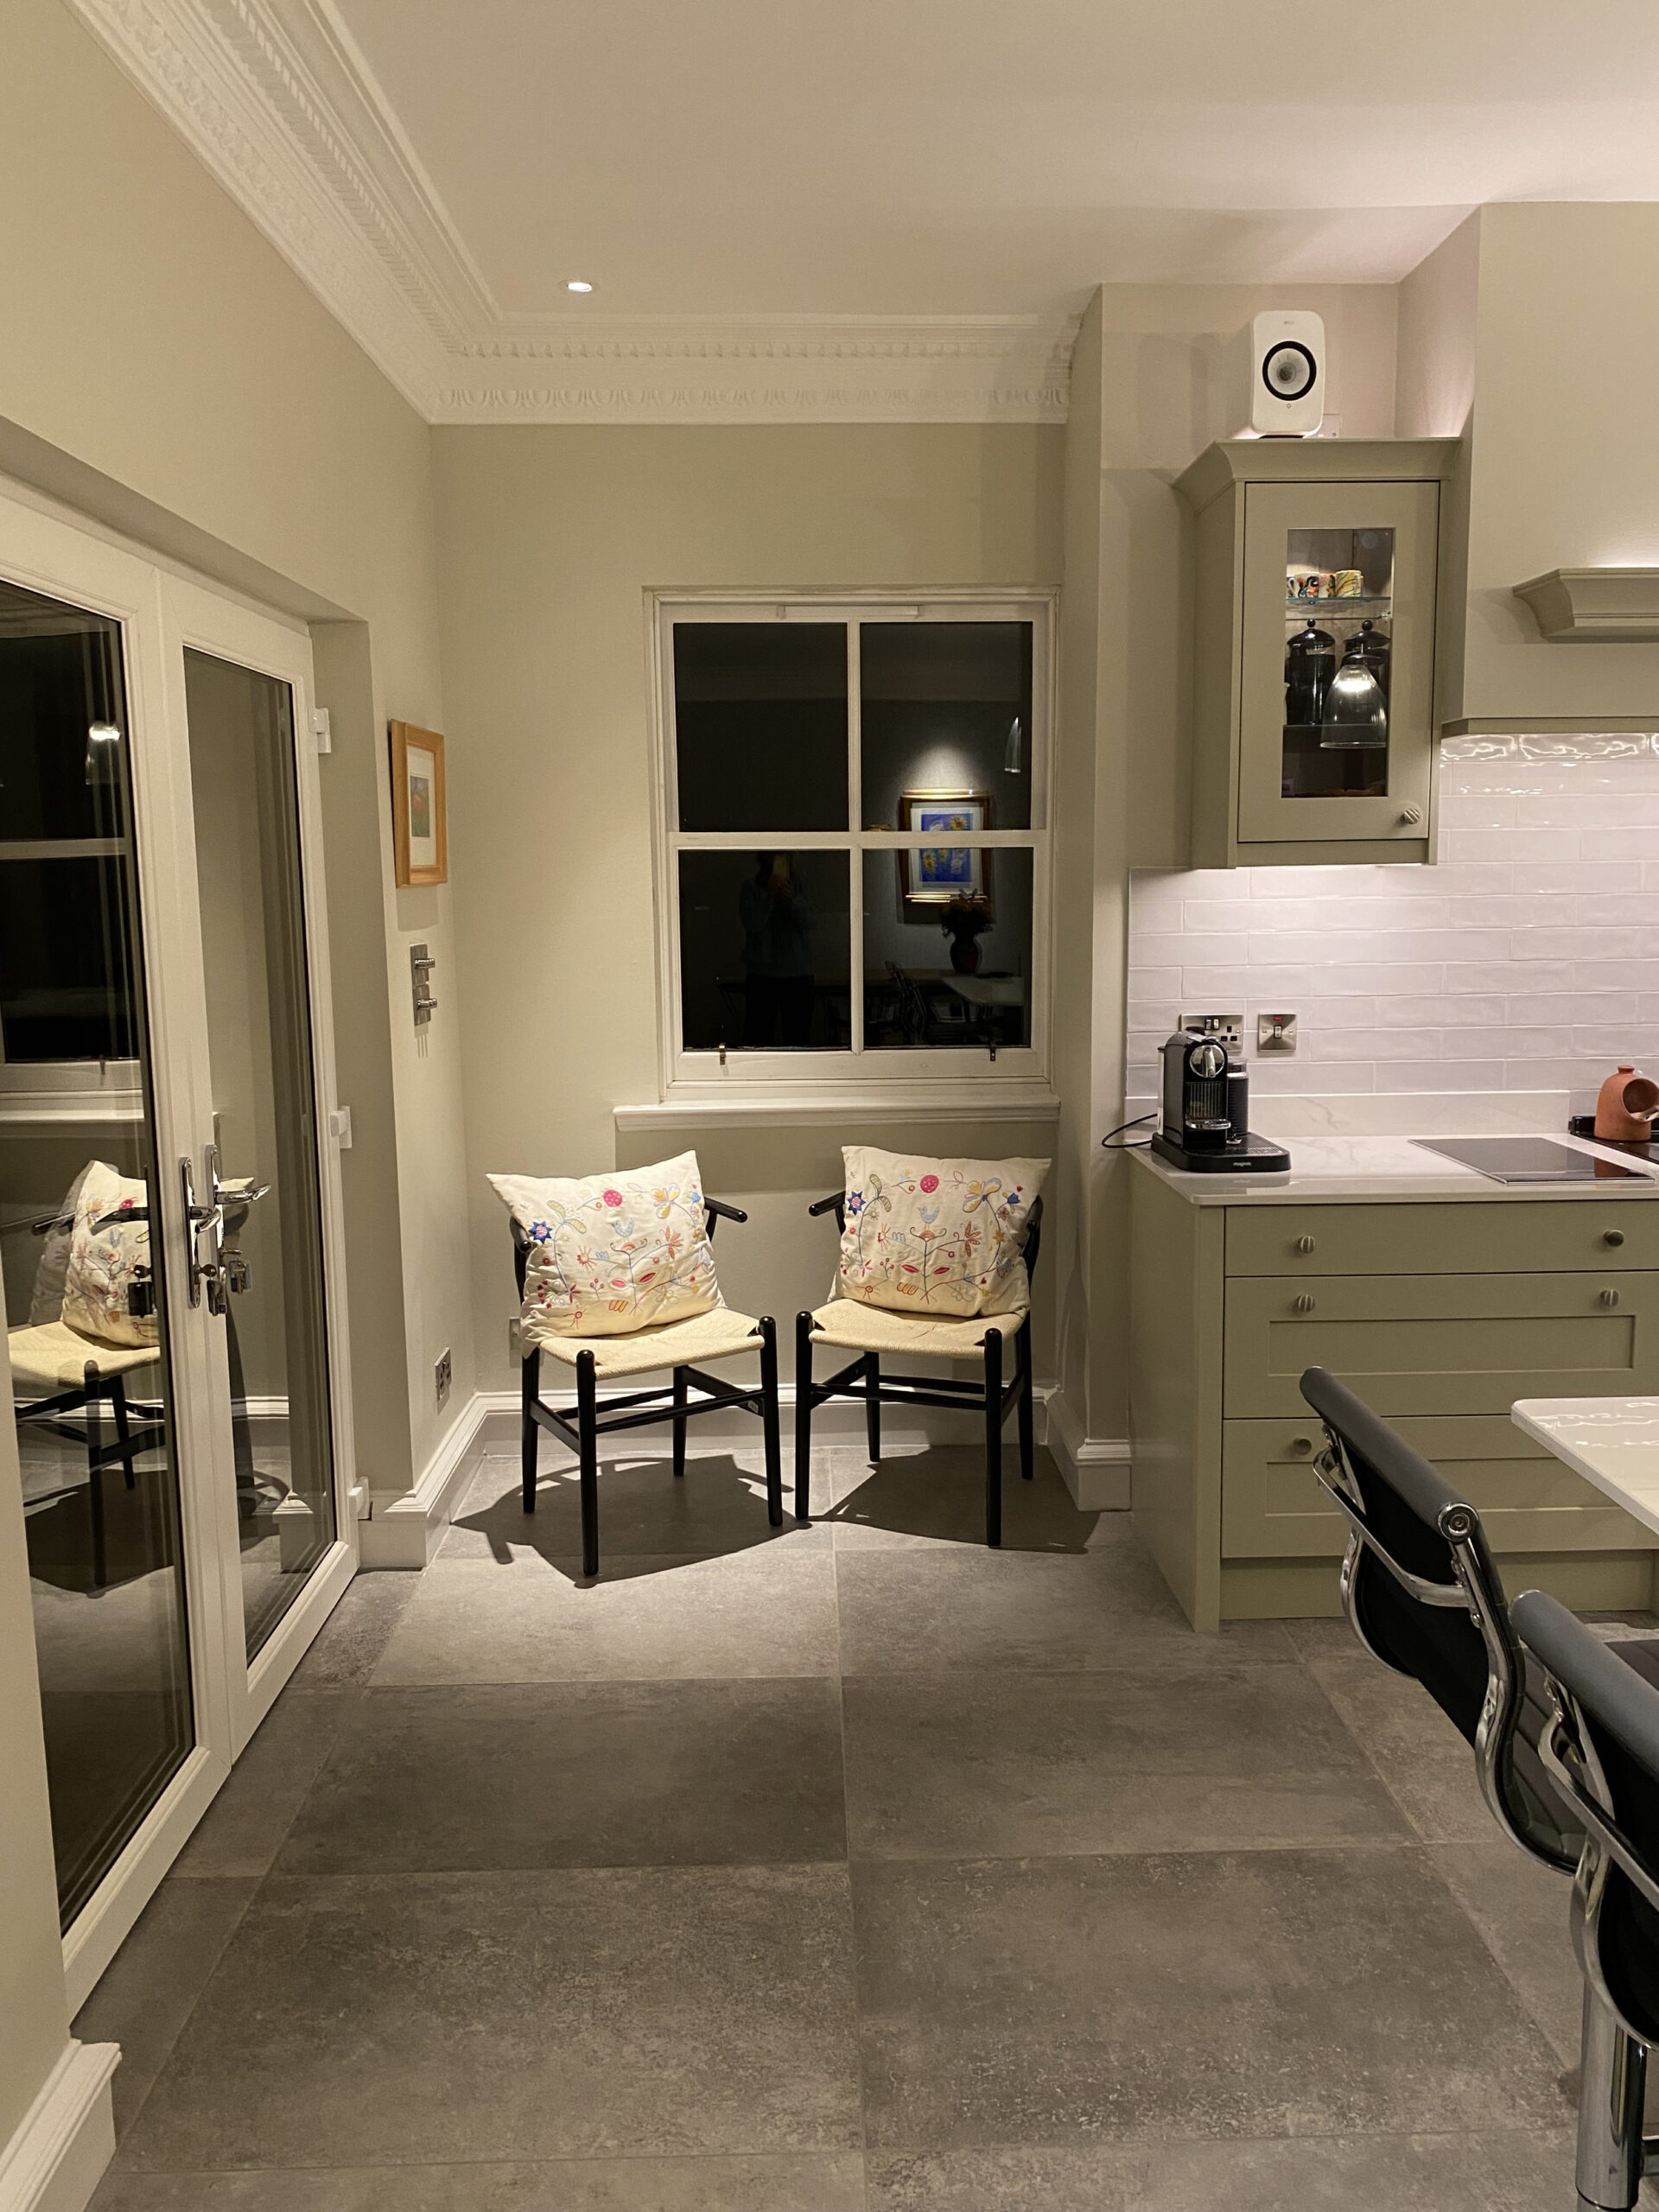 Top tips for cosy lighting in your home. A photo of a domestic kitchen interior with furniture and specialist lighting designed by Cat Lighting